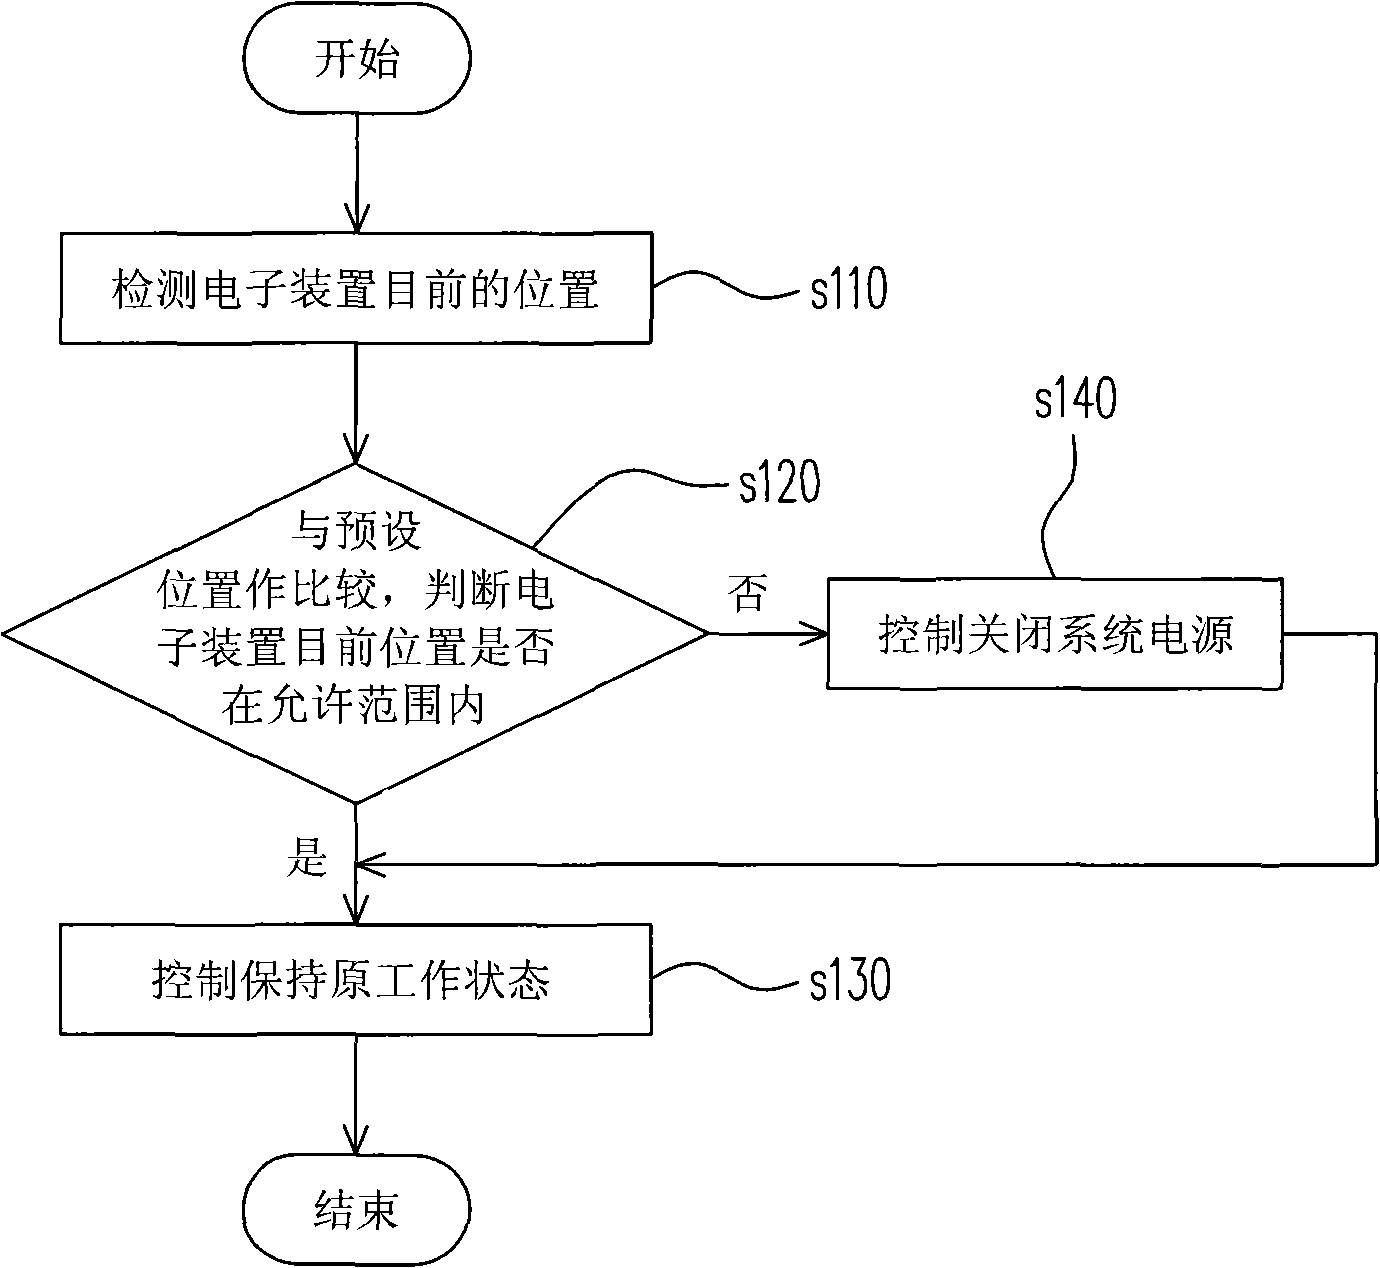 Method and system for controlling system security based on position information